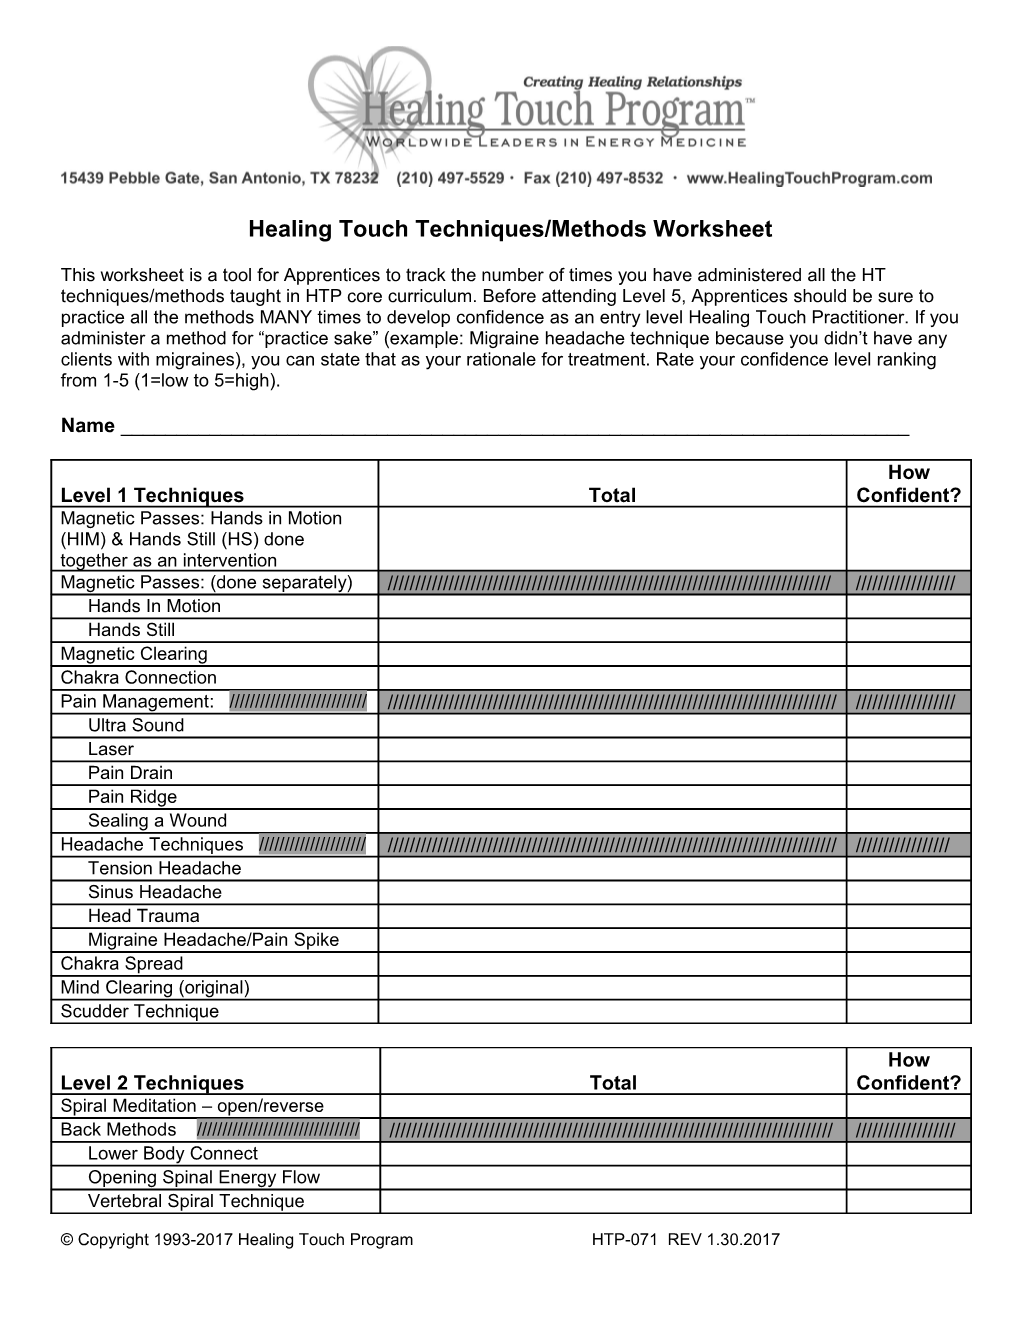 Healing Touch Techniques/Methods Worksheet